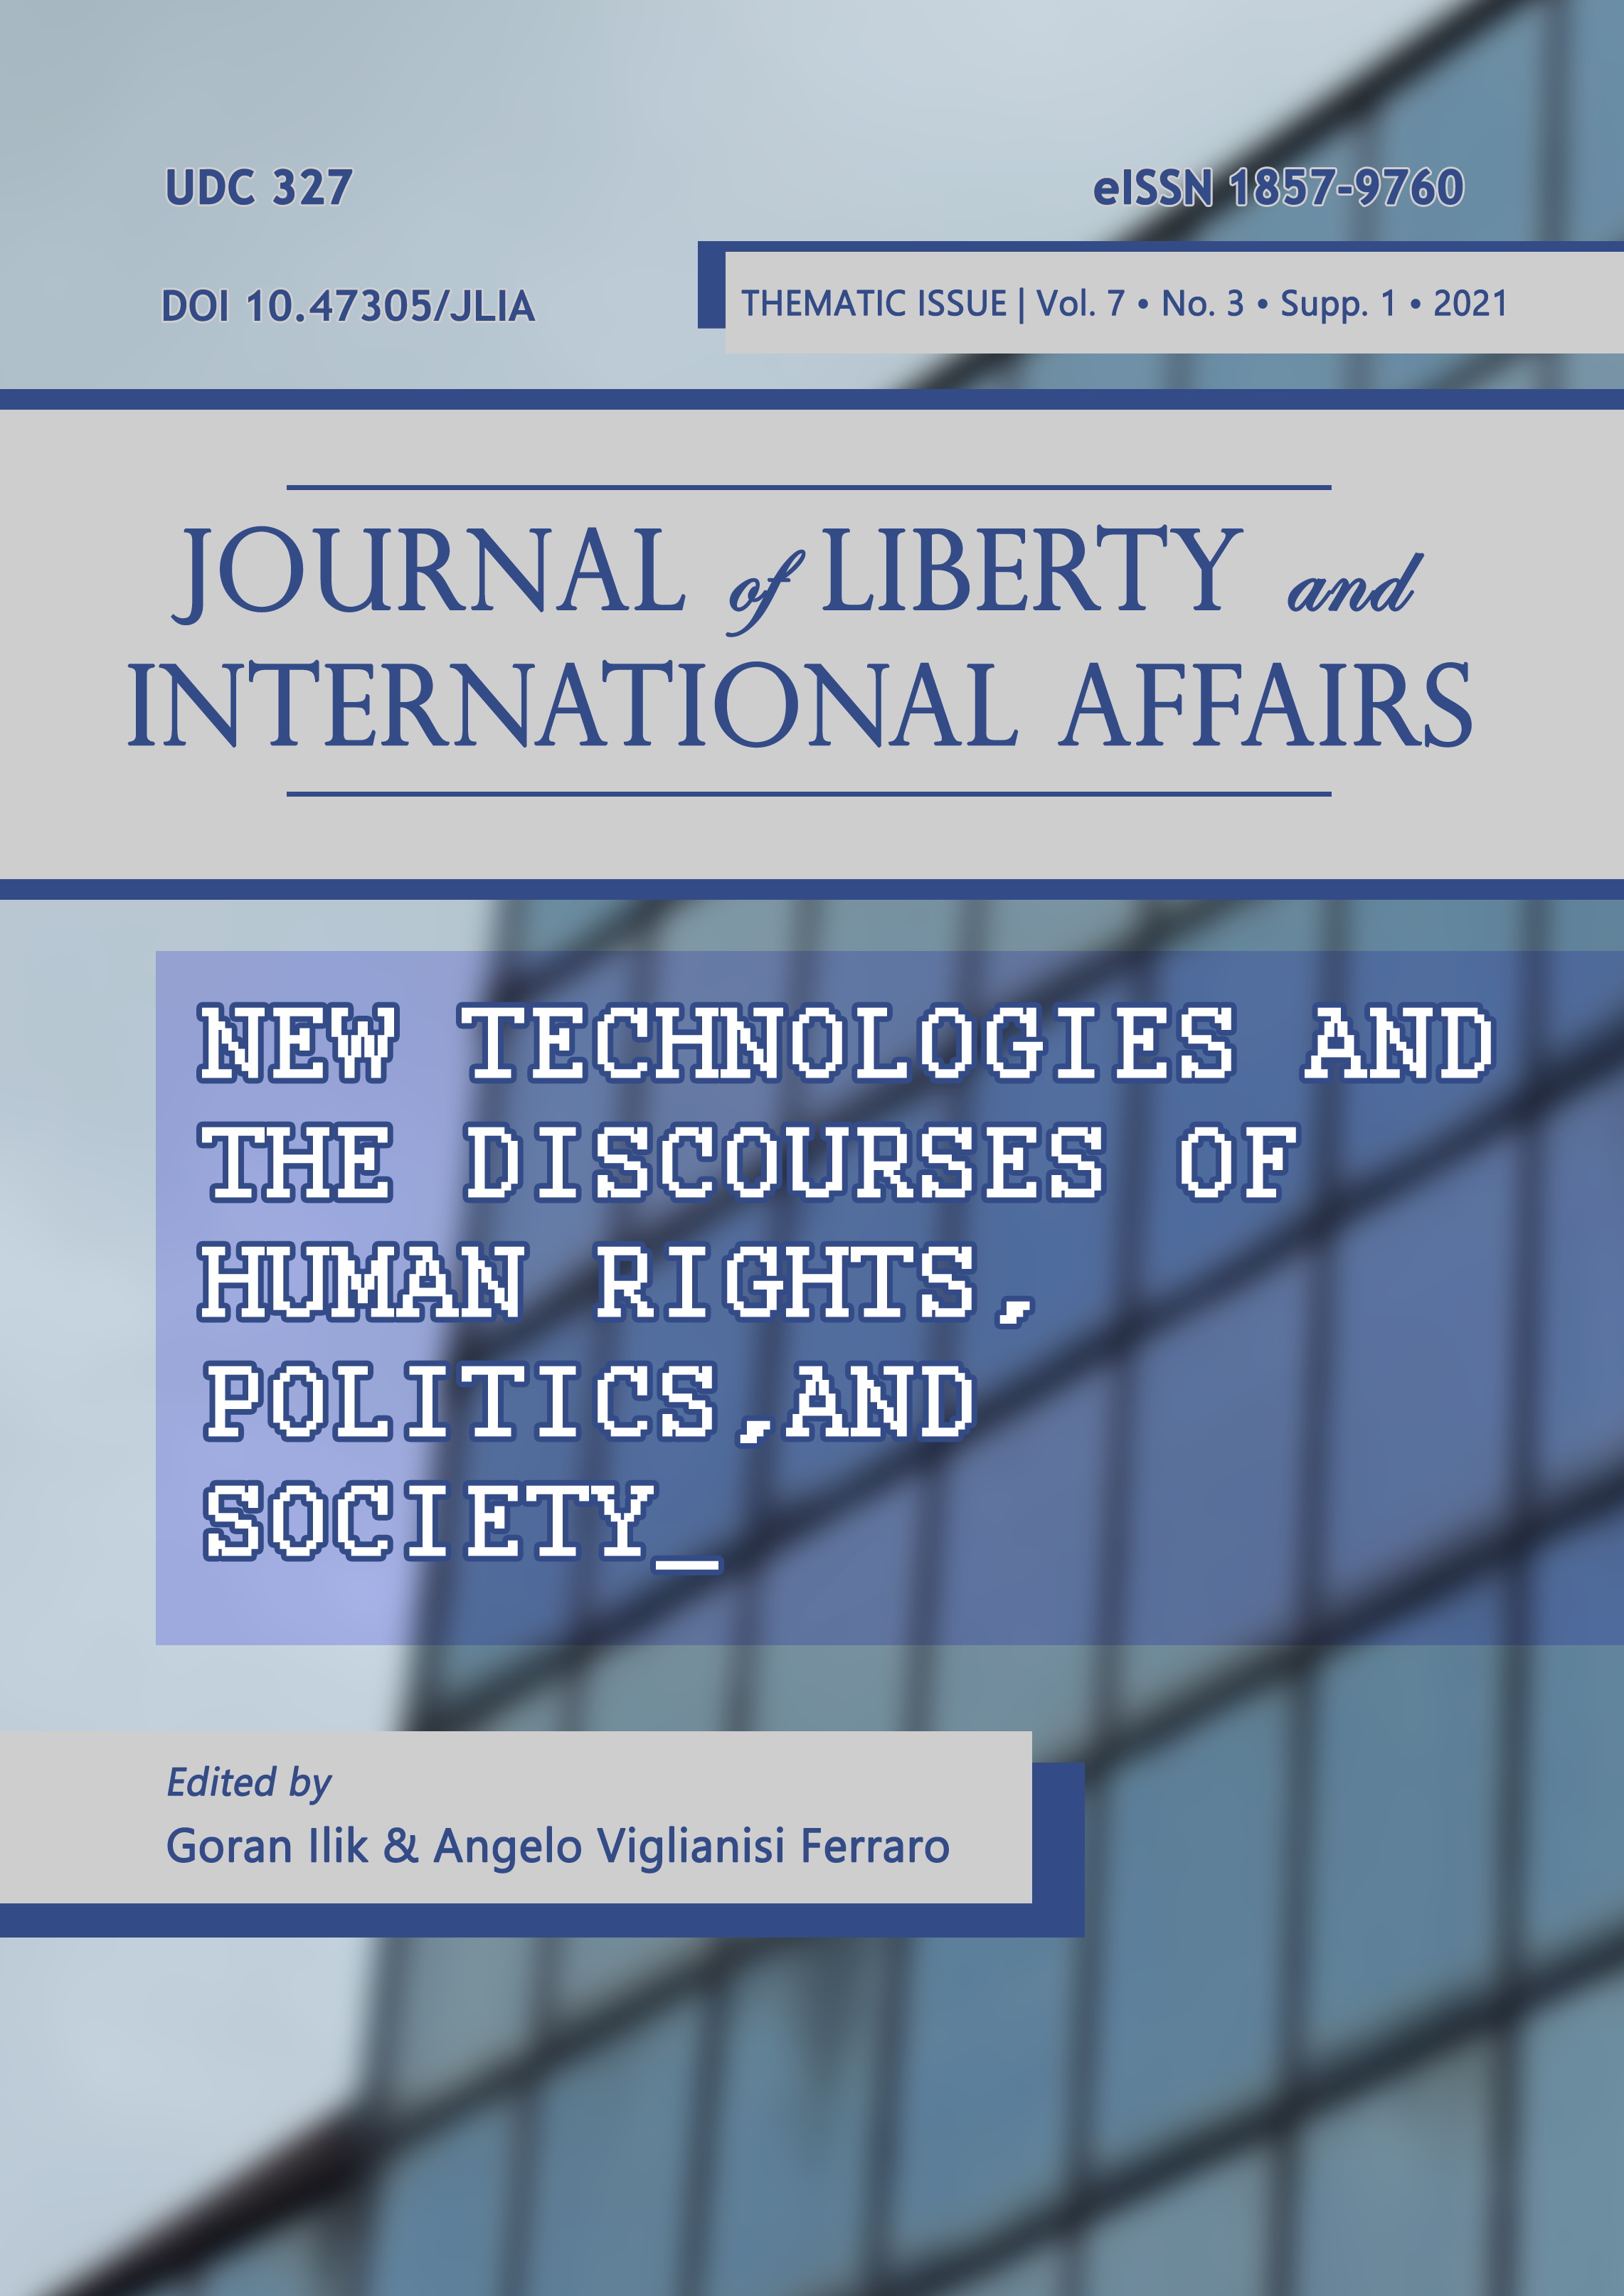 NEW TECHNOLOGIES AND THE DISCOURSES OF HUMAN RIGHTS, POLITICS, AND SOCIETY